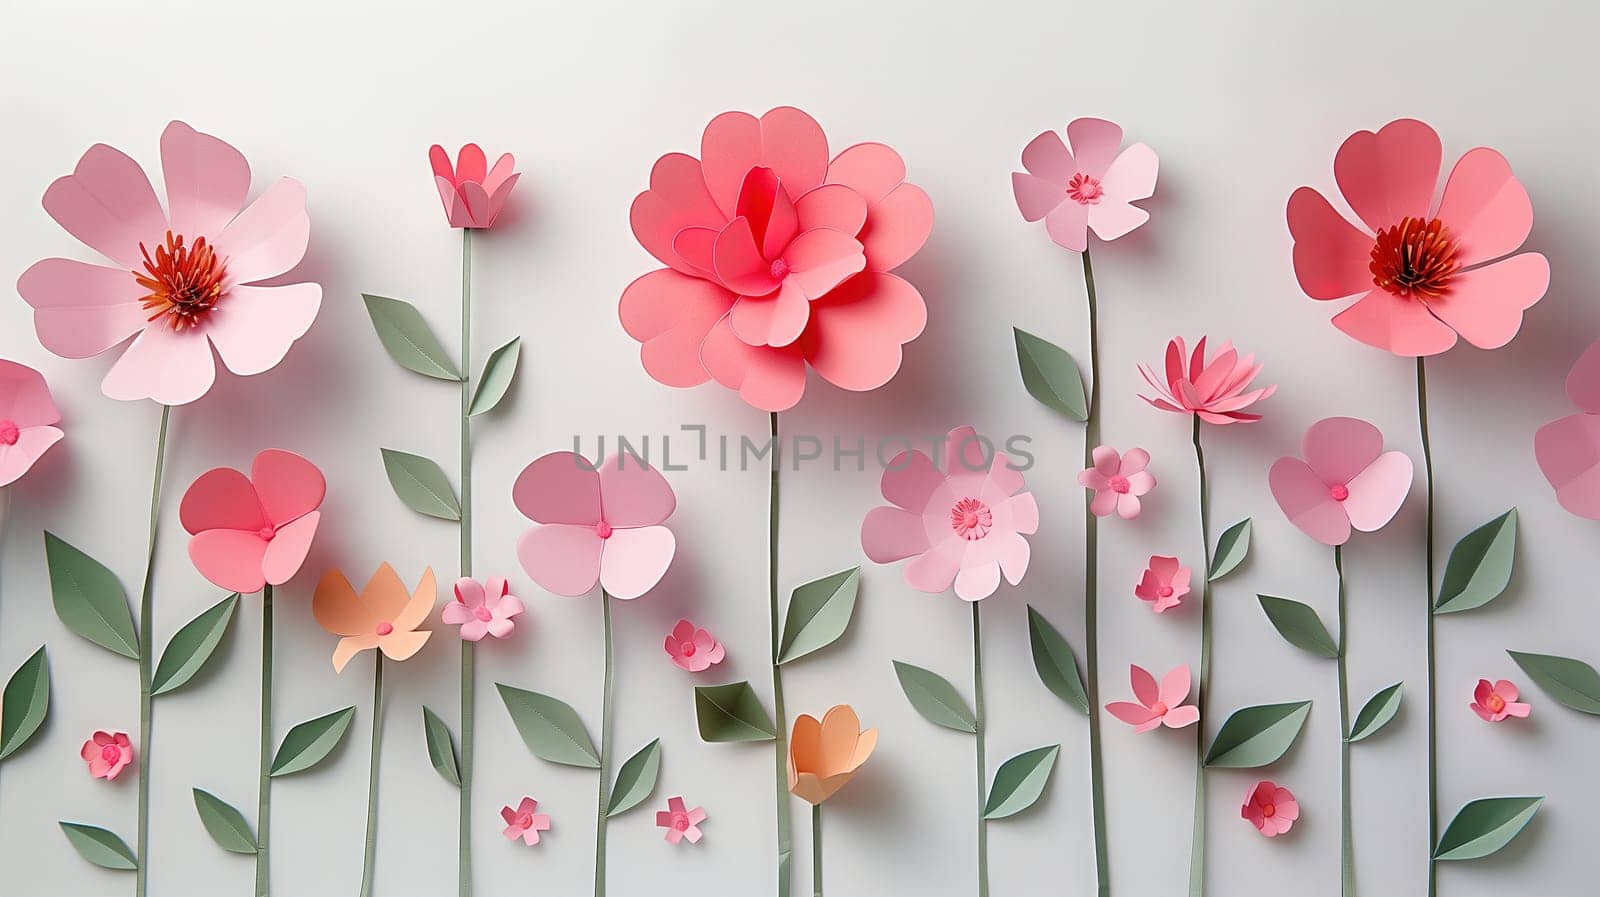 A collection of paper flowers hanging on a white wall. The colorful blooms stand out against the clean backdrop, creating a visually striking scene.